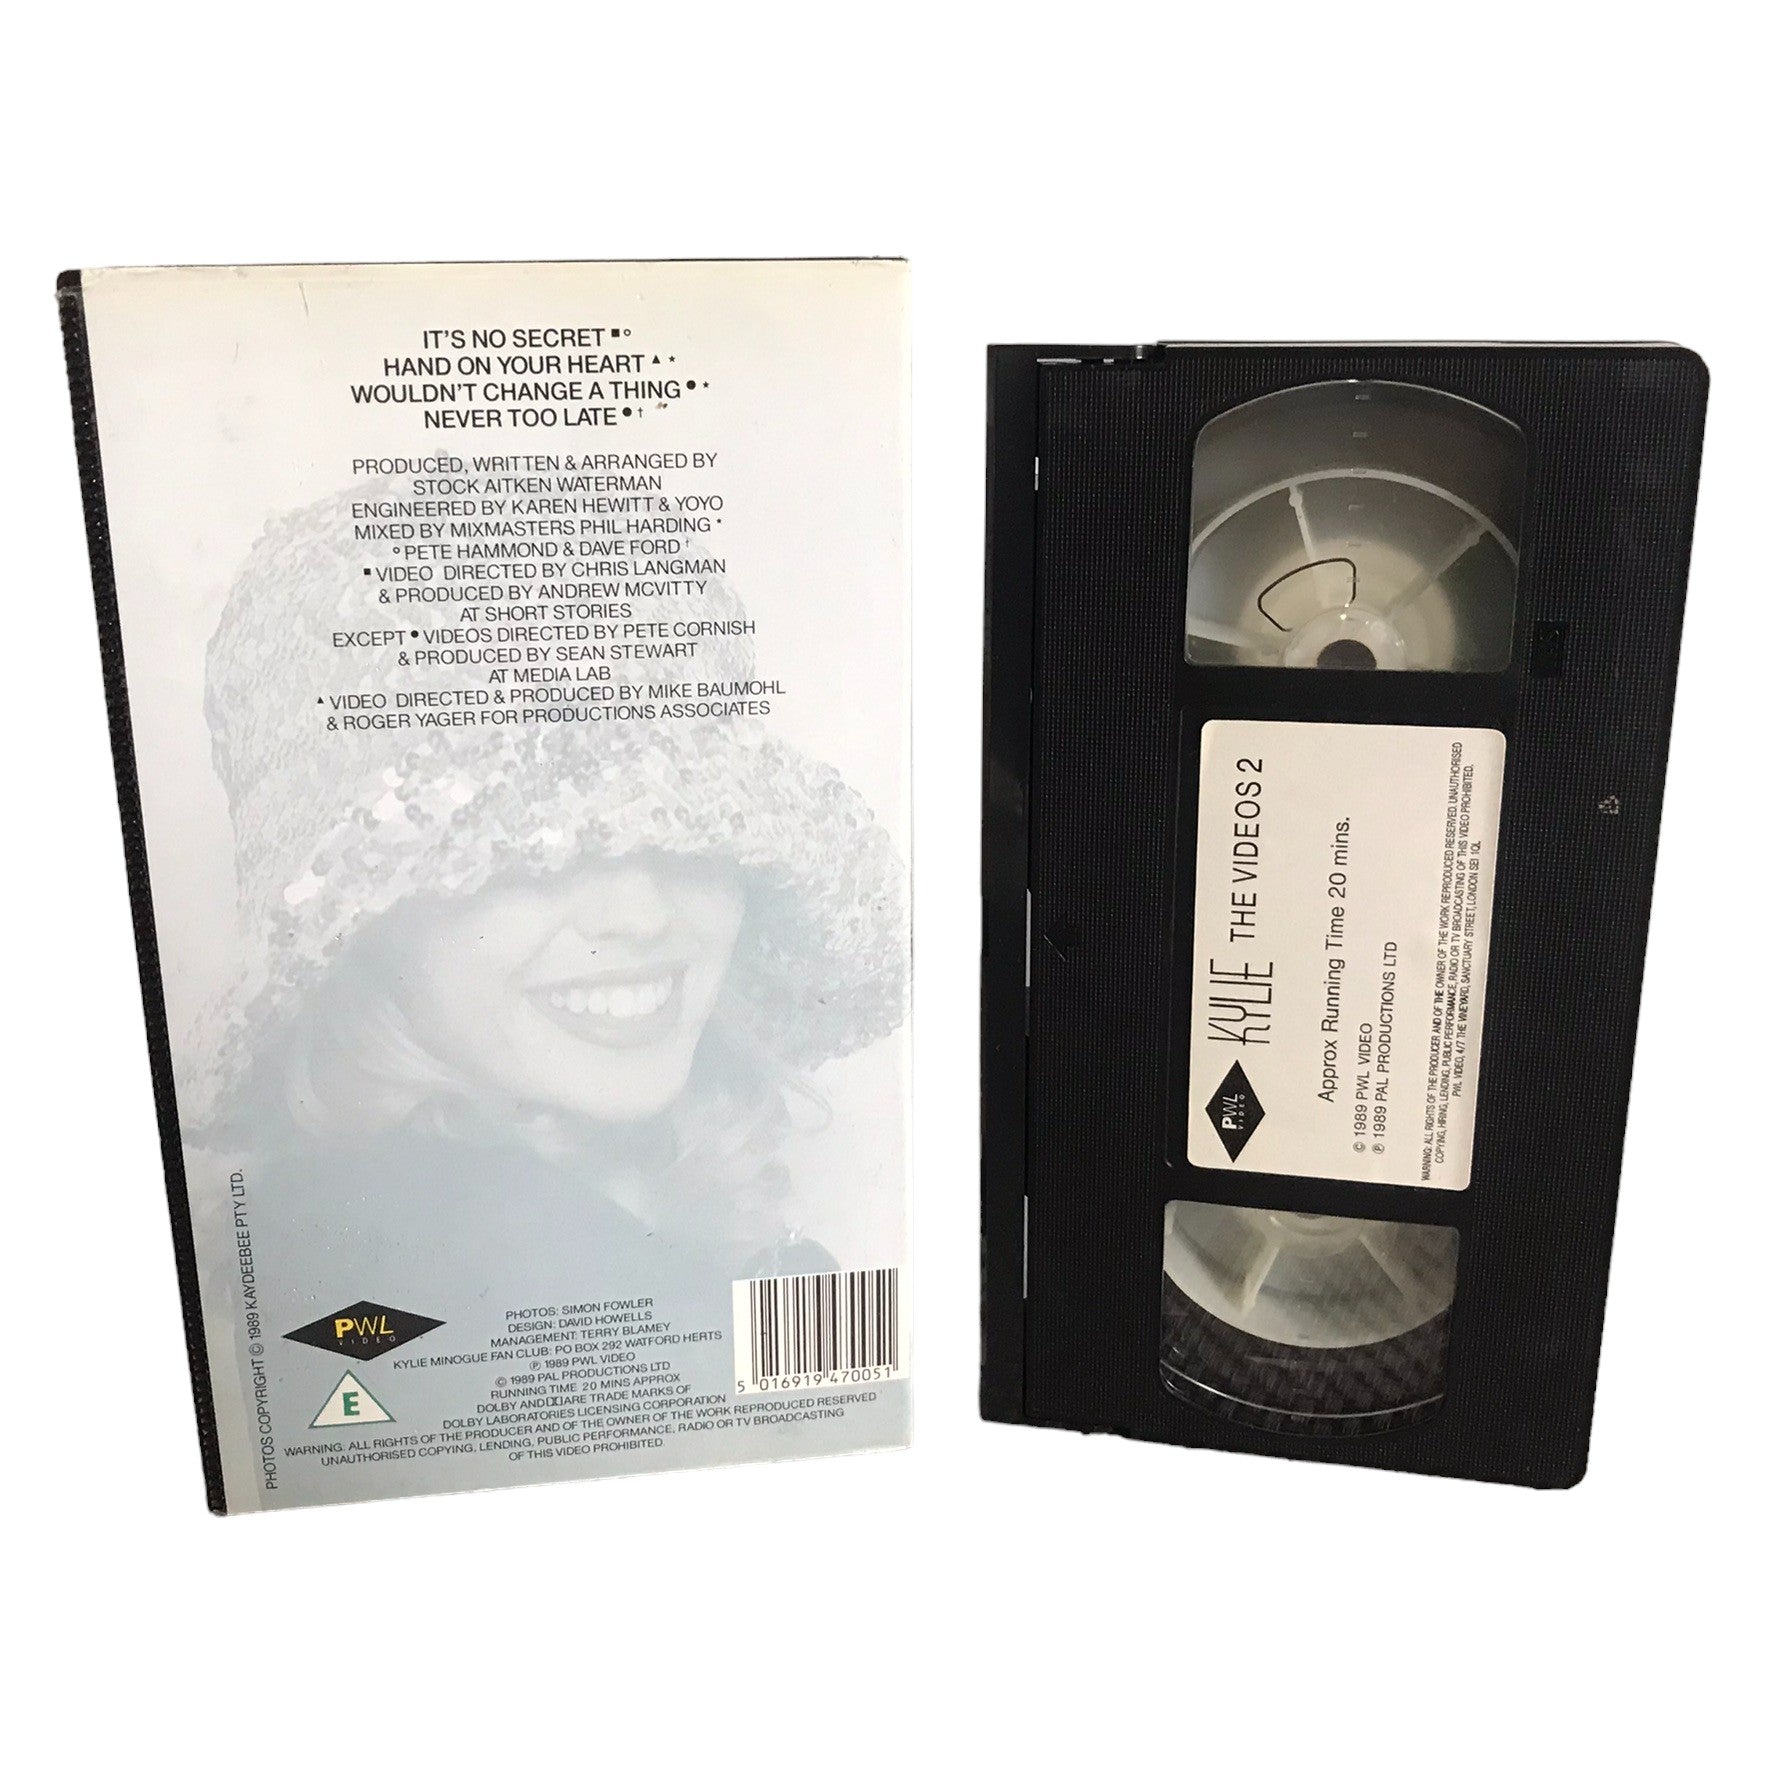 Kylie The Videos 2 - Kylie Minogue - PWL Video - Music - Pal - VHS-